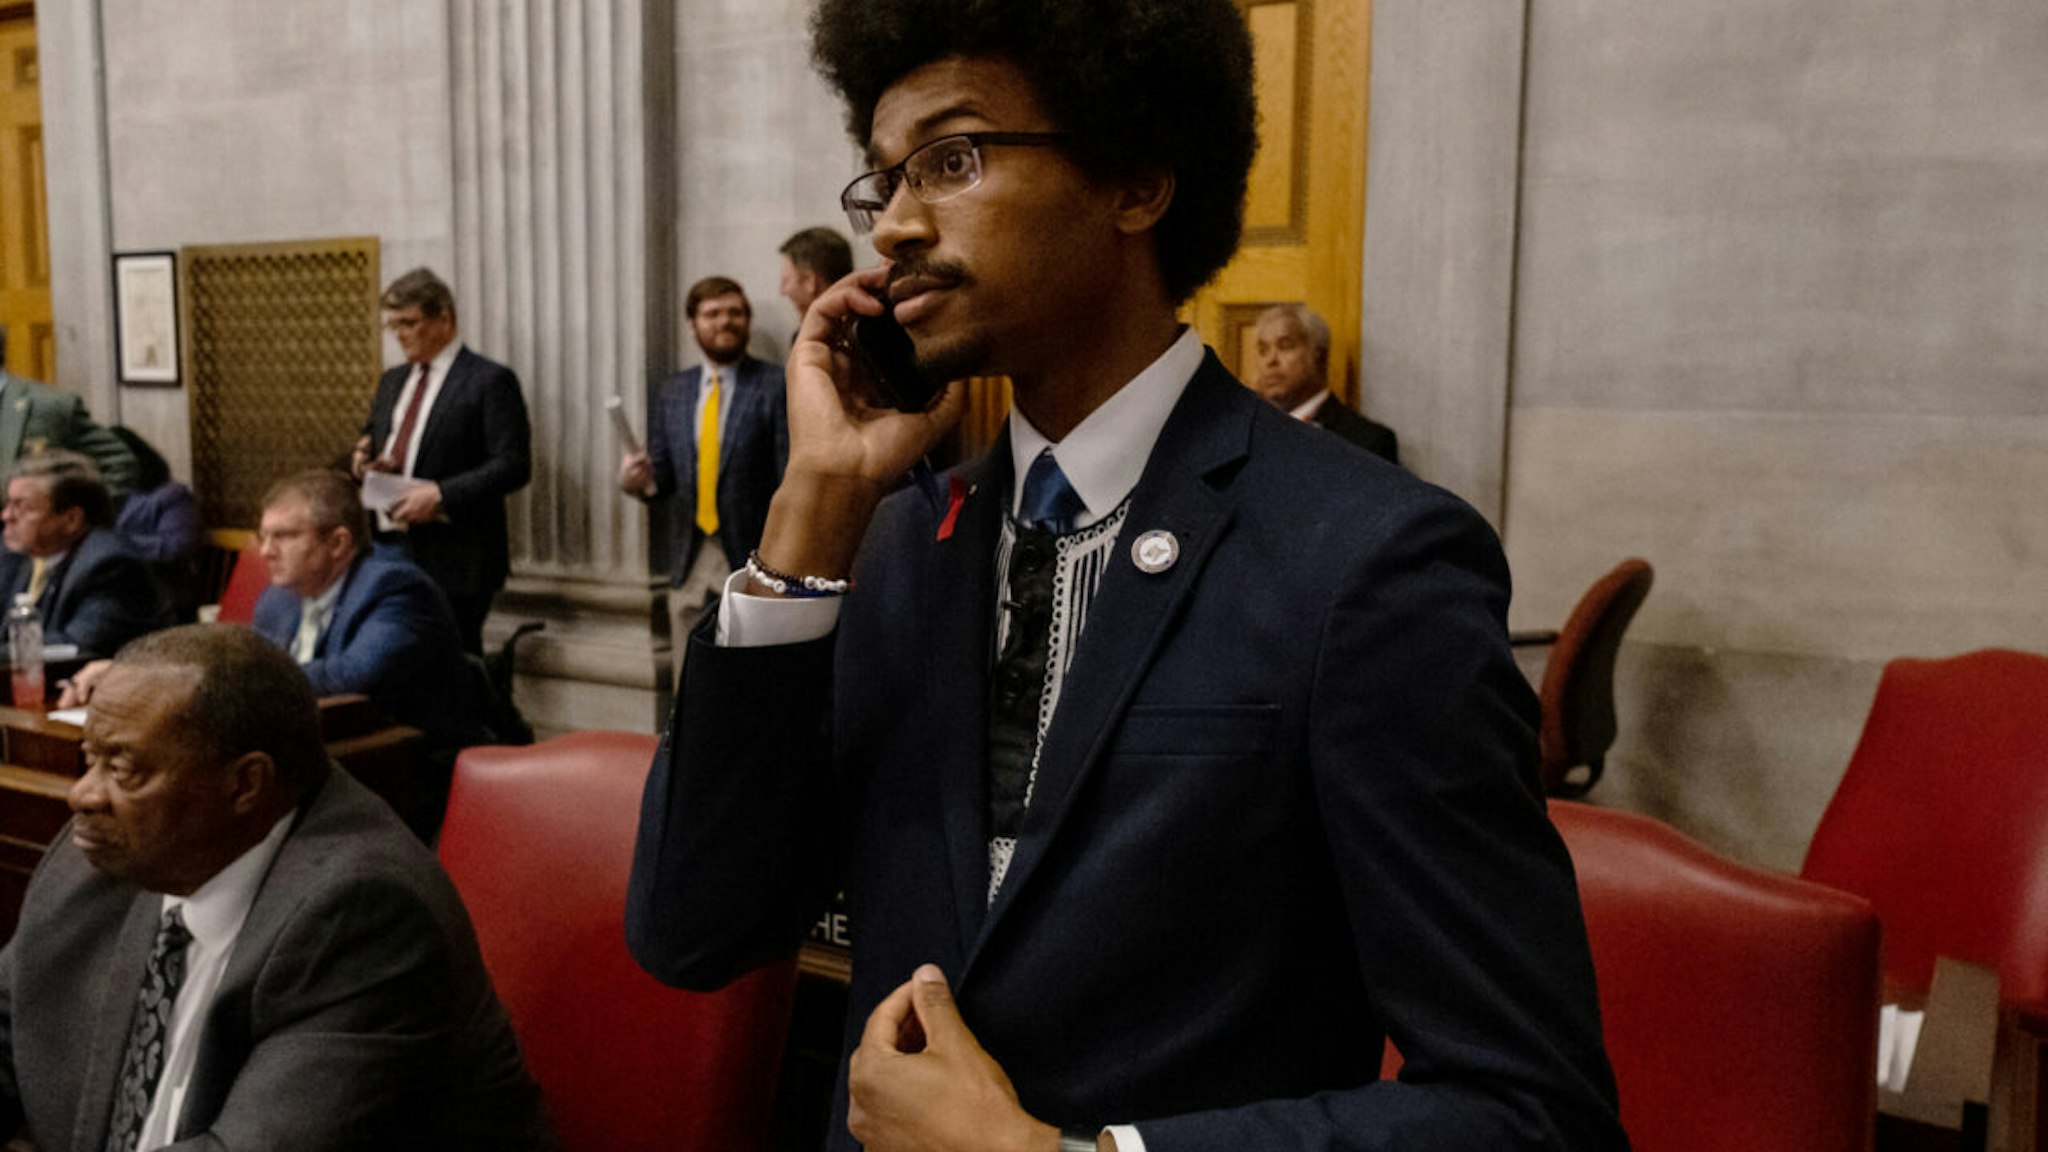 NASHVILLE, TN - APRIL 06: Democratic state Rep. Justin Pearson of Memphis speaks on his phone while being expelled from the state Legislature on April 6, 2023 in Nashville, Tennessee. Pearson and fellow Democratic Reps. Gloria Johnson of Knoxville and Justin Jones of Nashville were brought up for expulsion for leading chants of protesters from the floor in the wake of a mass shooting at a Christian school in which three 9-year-old students and three adults were killed by a 28-year-old former student of the school on March 27. Pearson and Jones, who is also Black, were expelled while the vote against Johnson, who is white, fell one vote short.